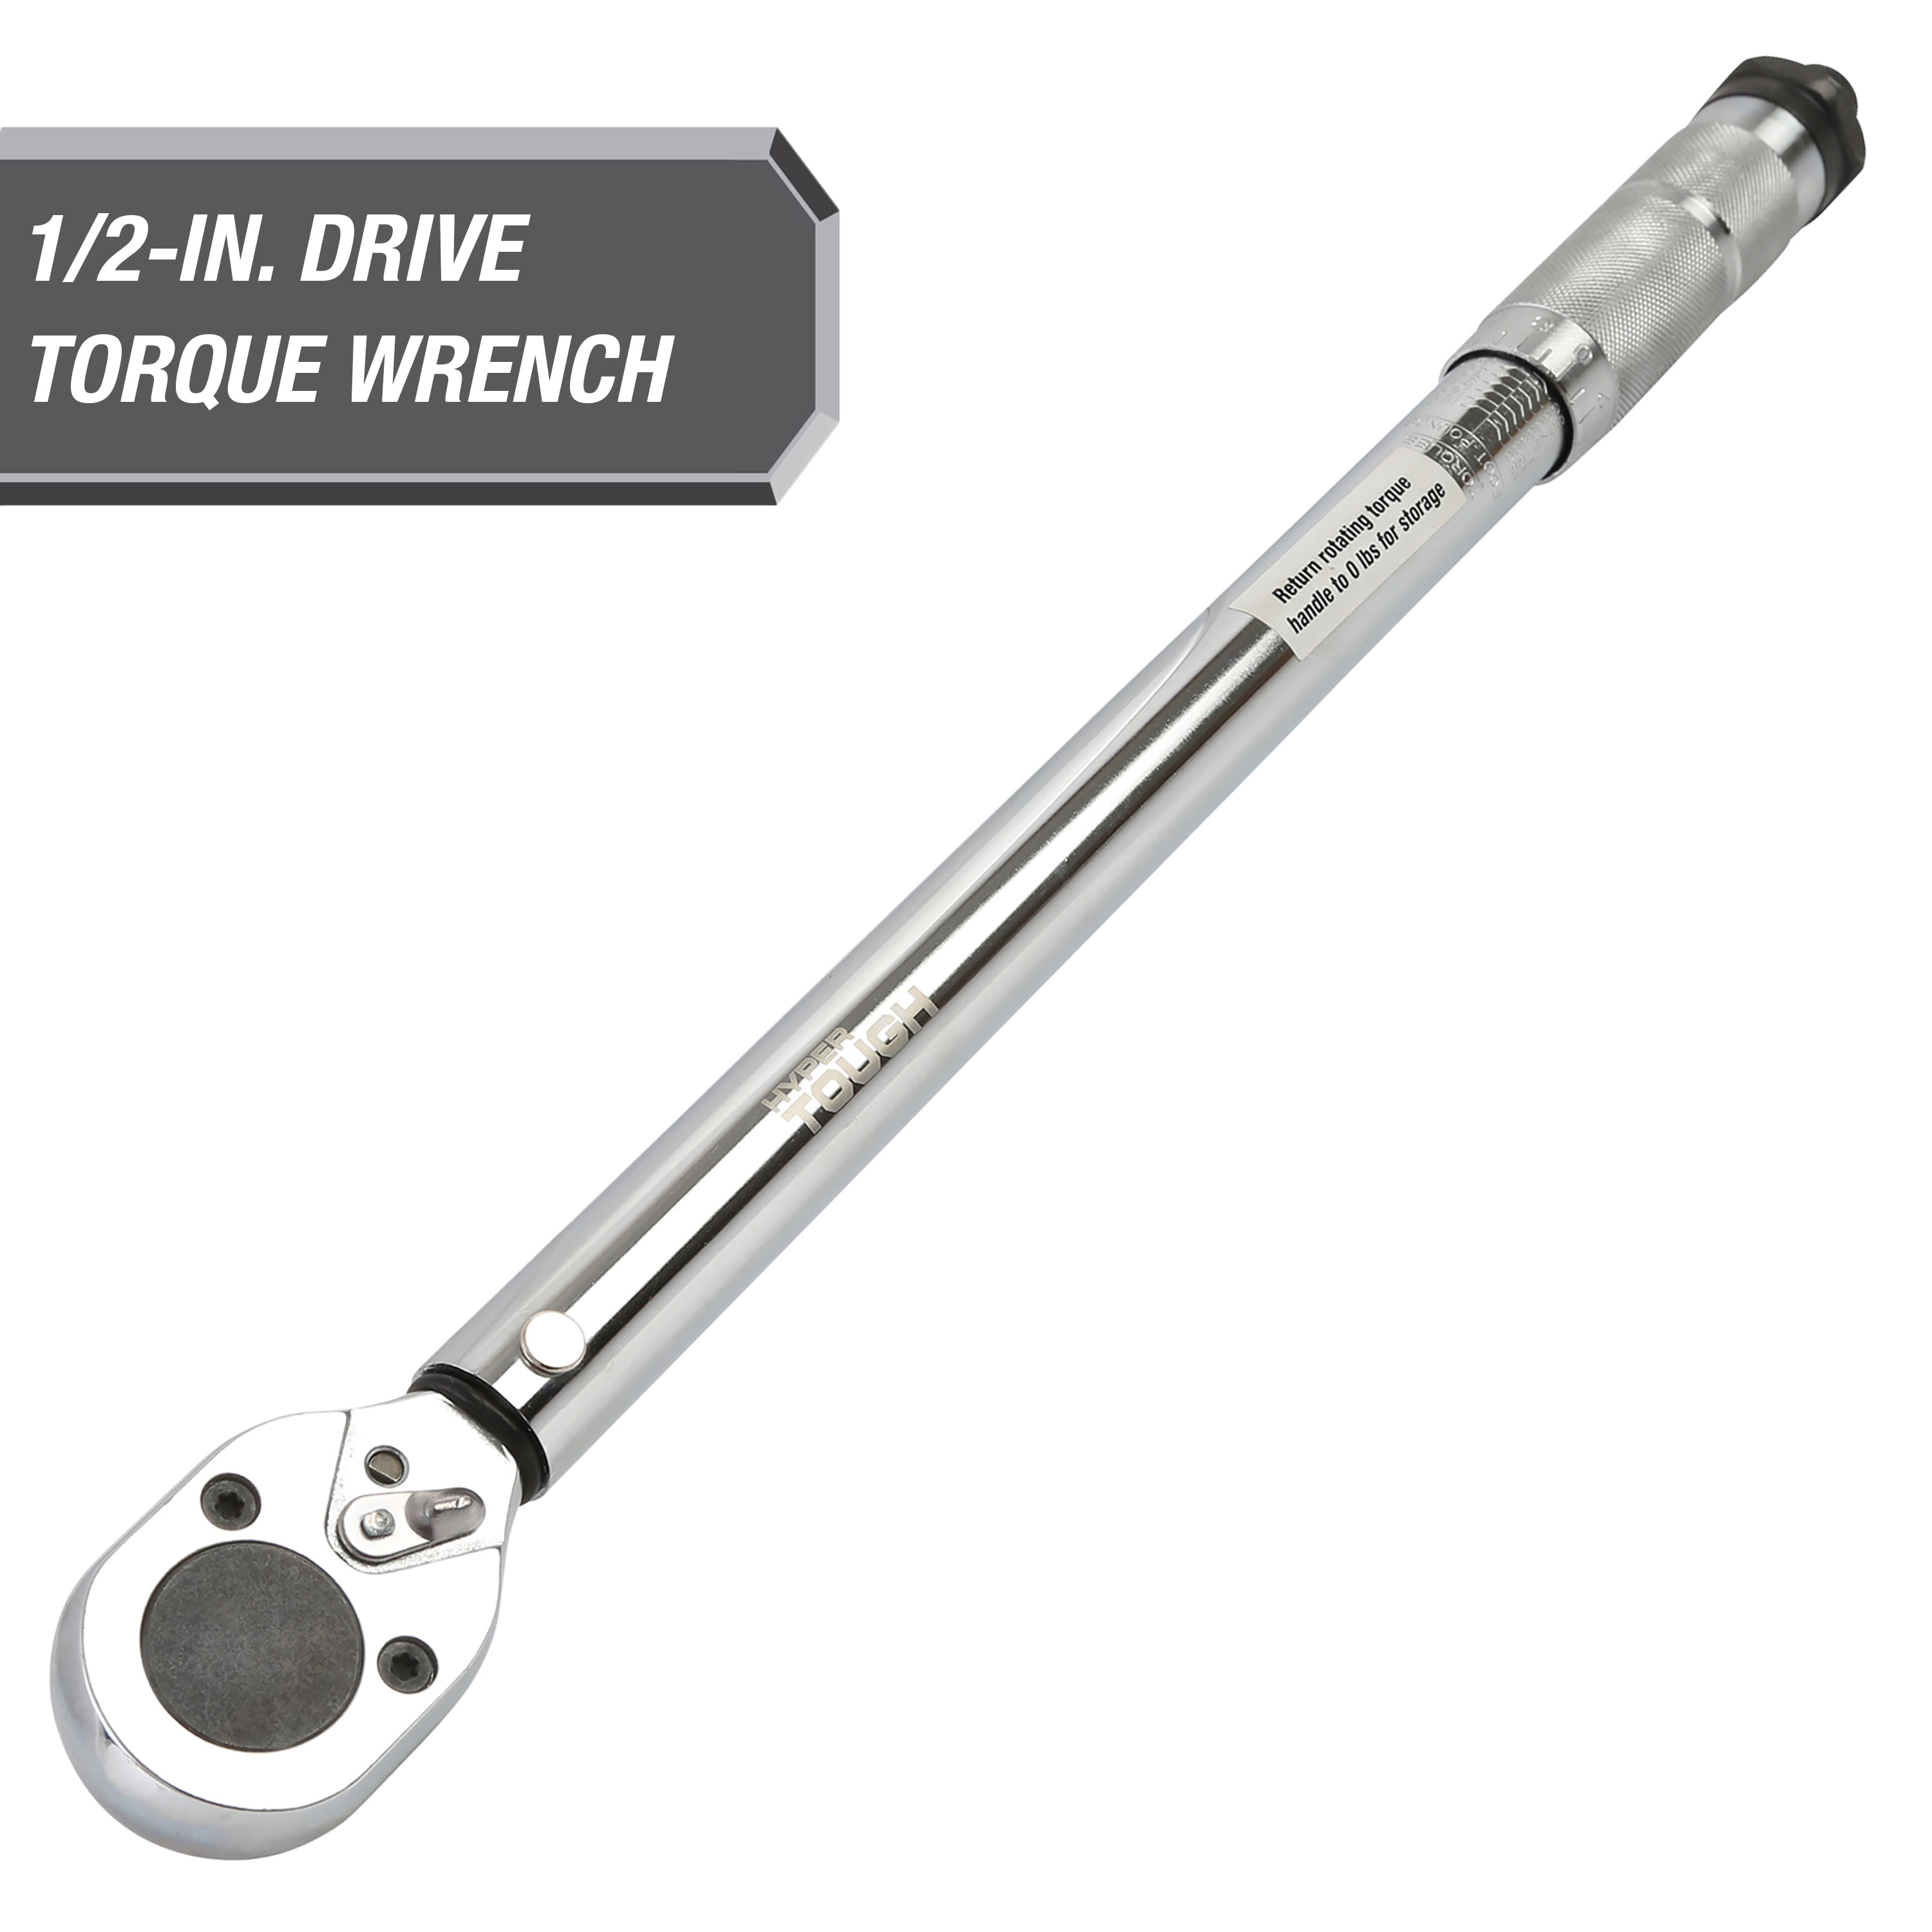 VANPO Digital Torque Wrench 3/8 inch Drive 5-99.5 ft-lbs./6.8-135Nm, ±2%  Accuracy, Electronic Torque Wrenches 